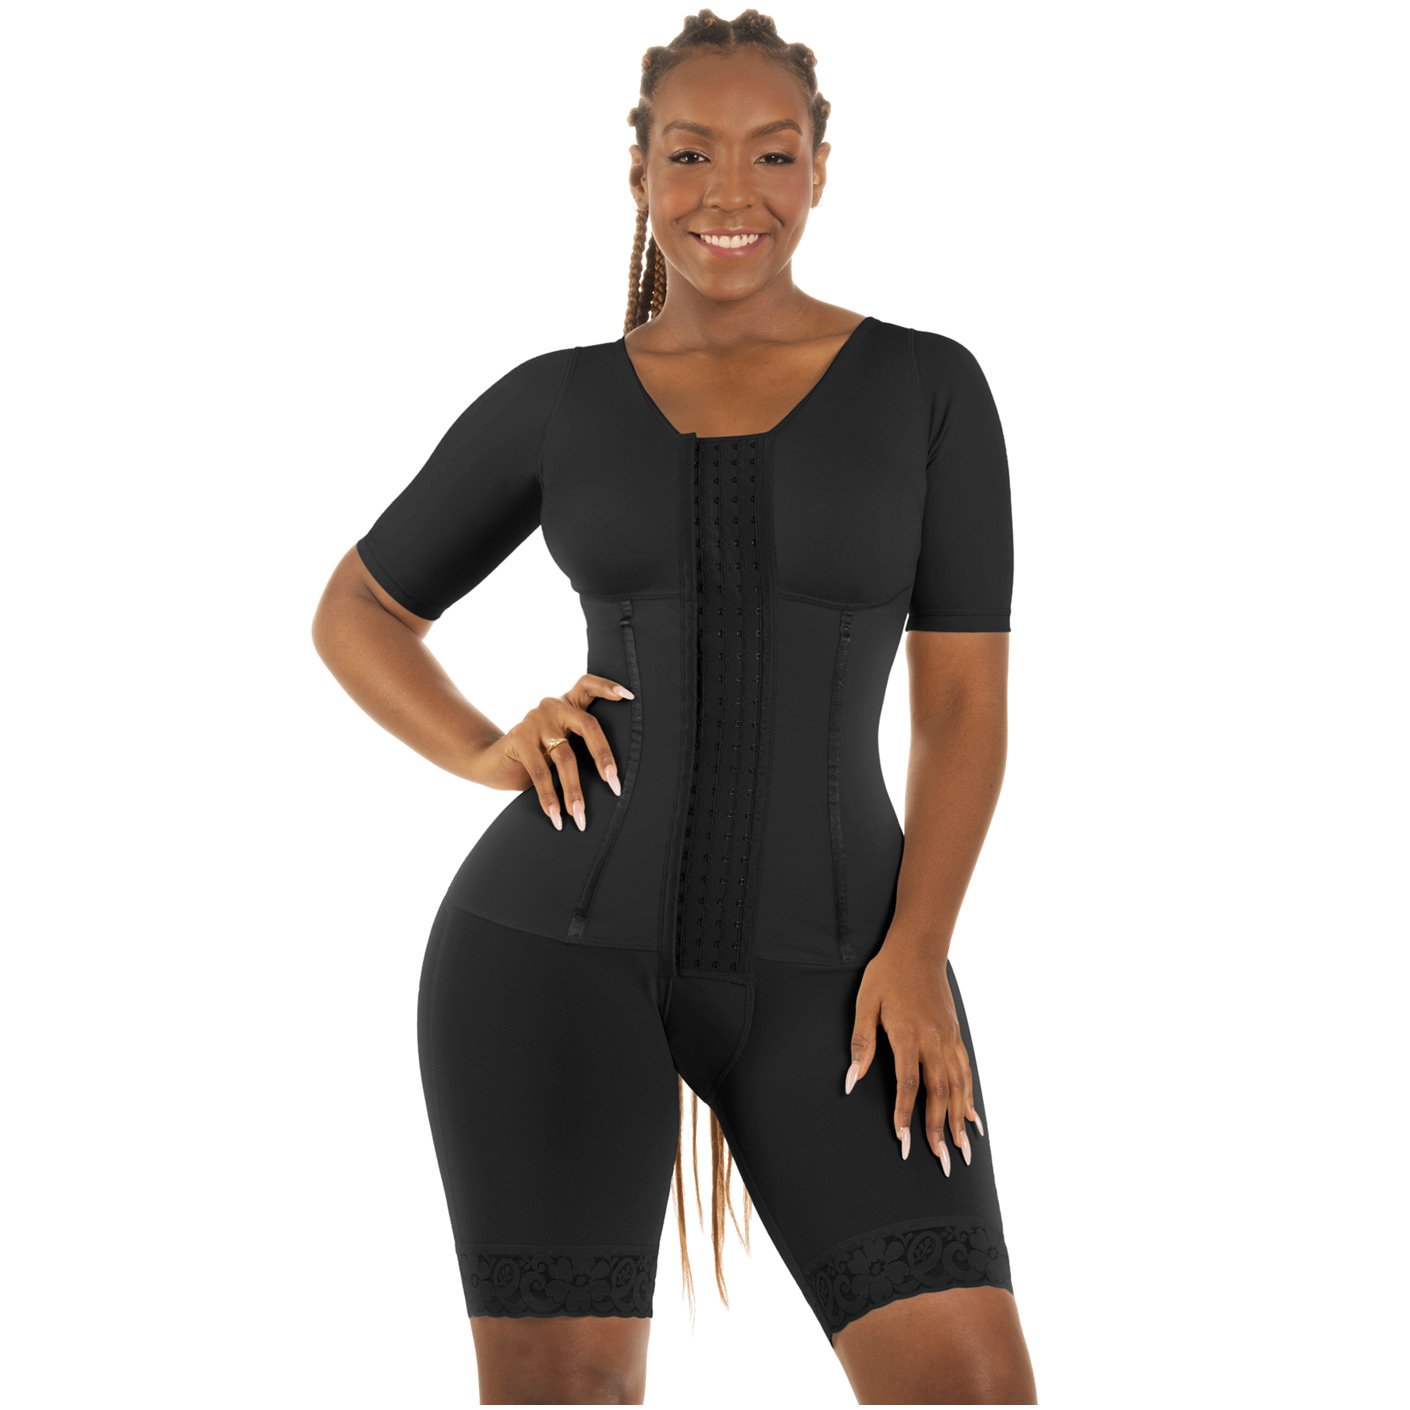 Bling Shapers 938BF | Stratchable Shapewear Bodysuit | Full Body Shaper with Sleeves | 3 in 1 Best Post Surgery Firm Control Women Garment - fajacolombian